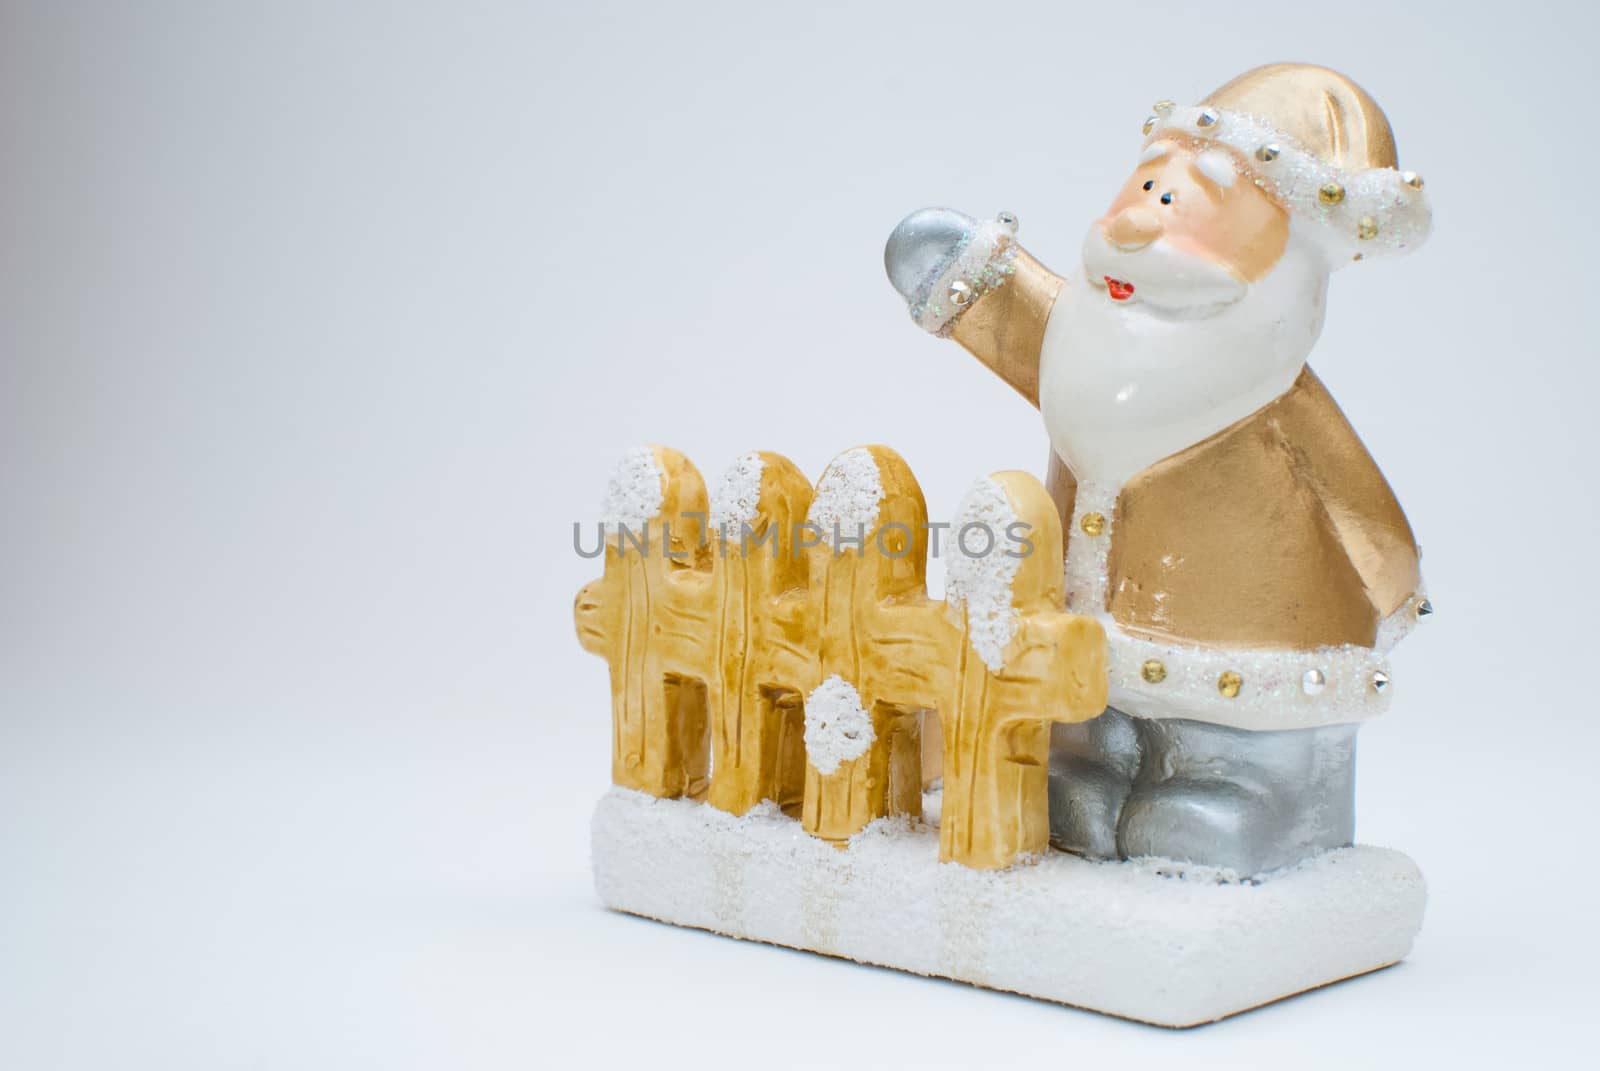 Golden old time Santa Claus figurine standing behind garden fence and waving with one hand, shot in studio with light background